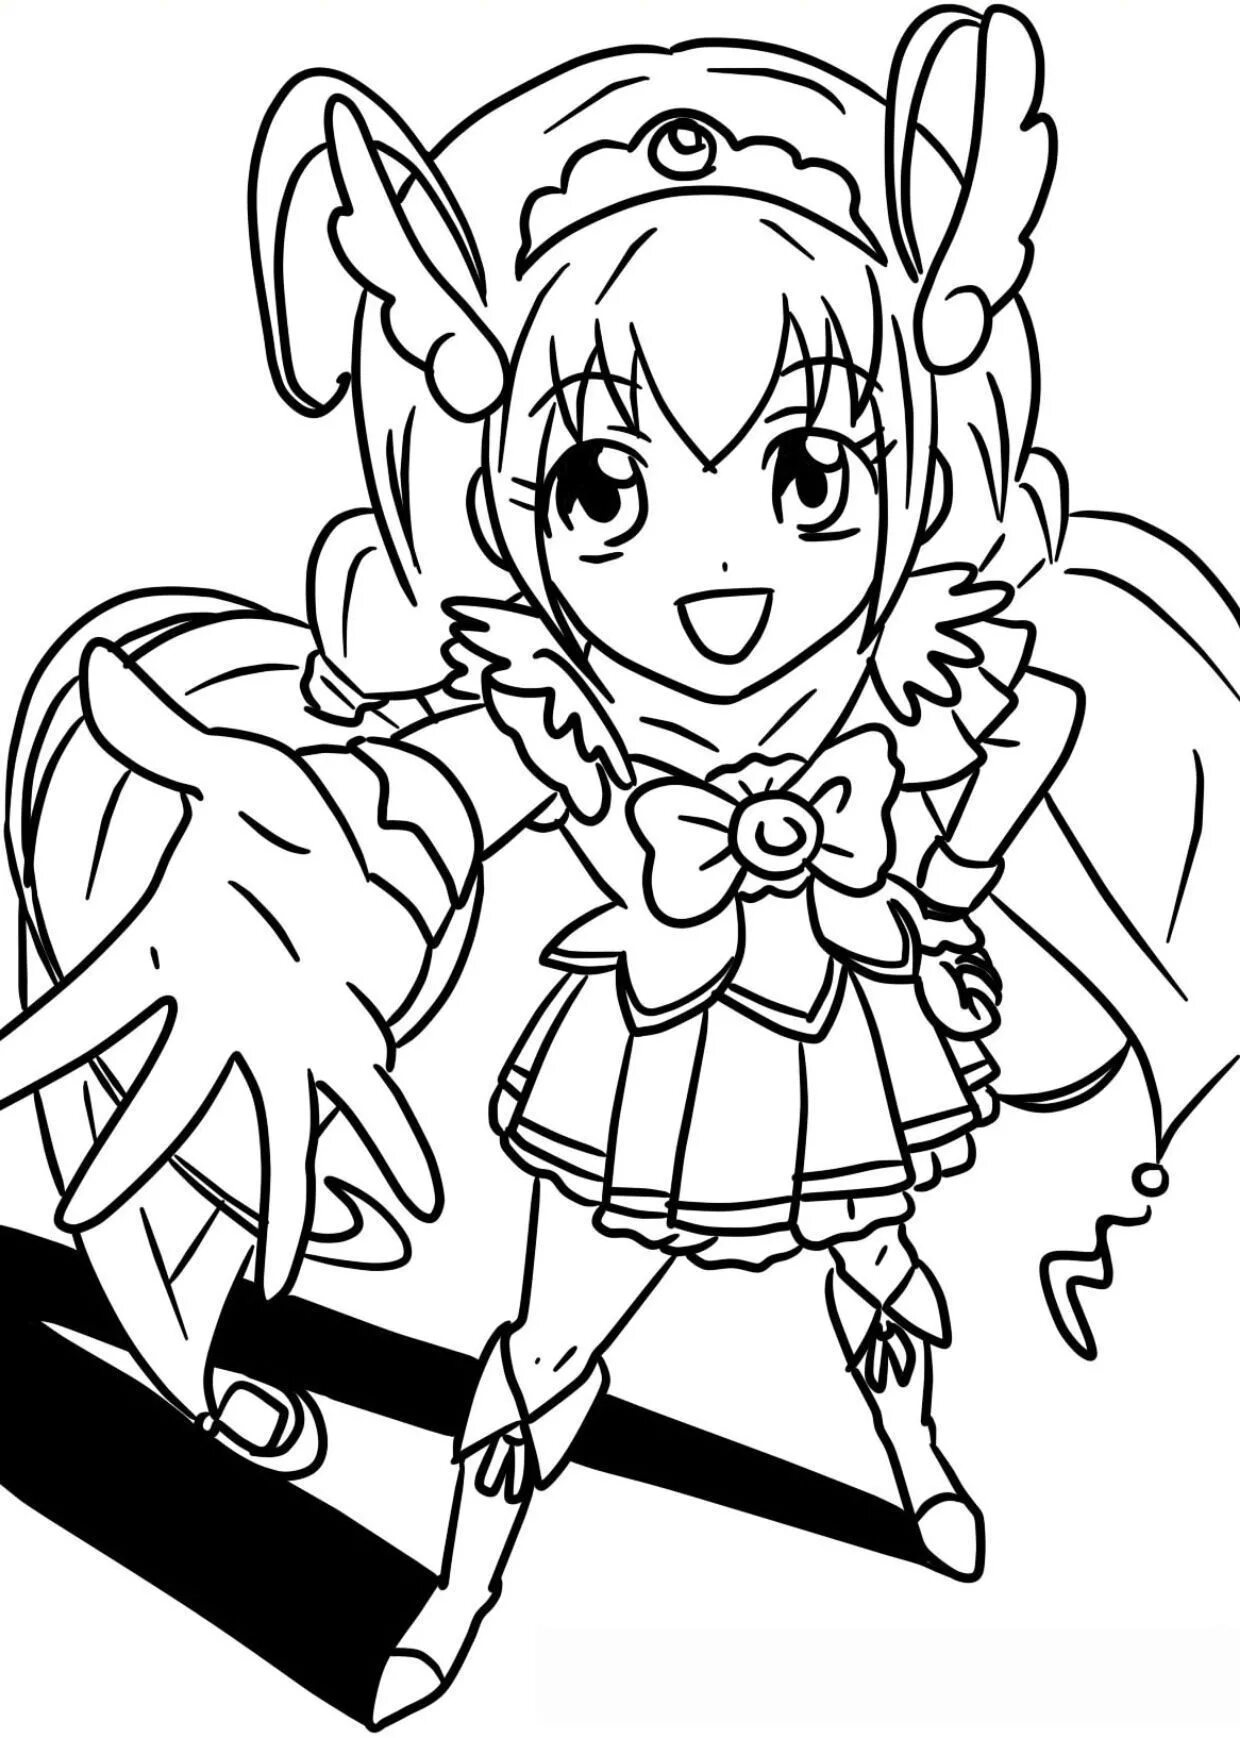 Glittering Power coloring page